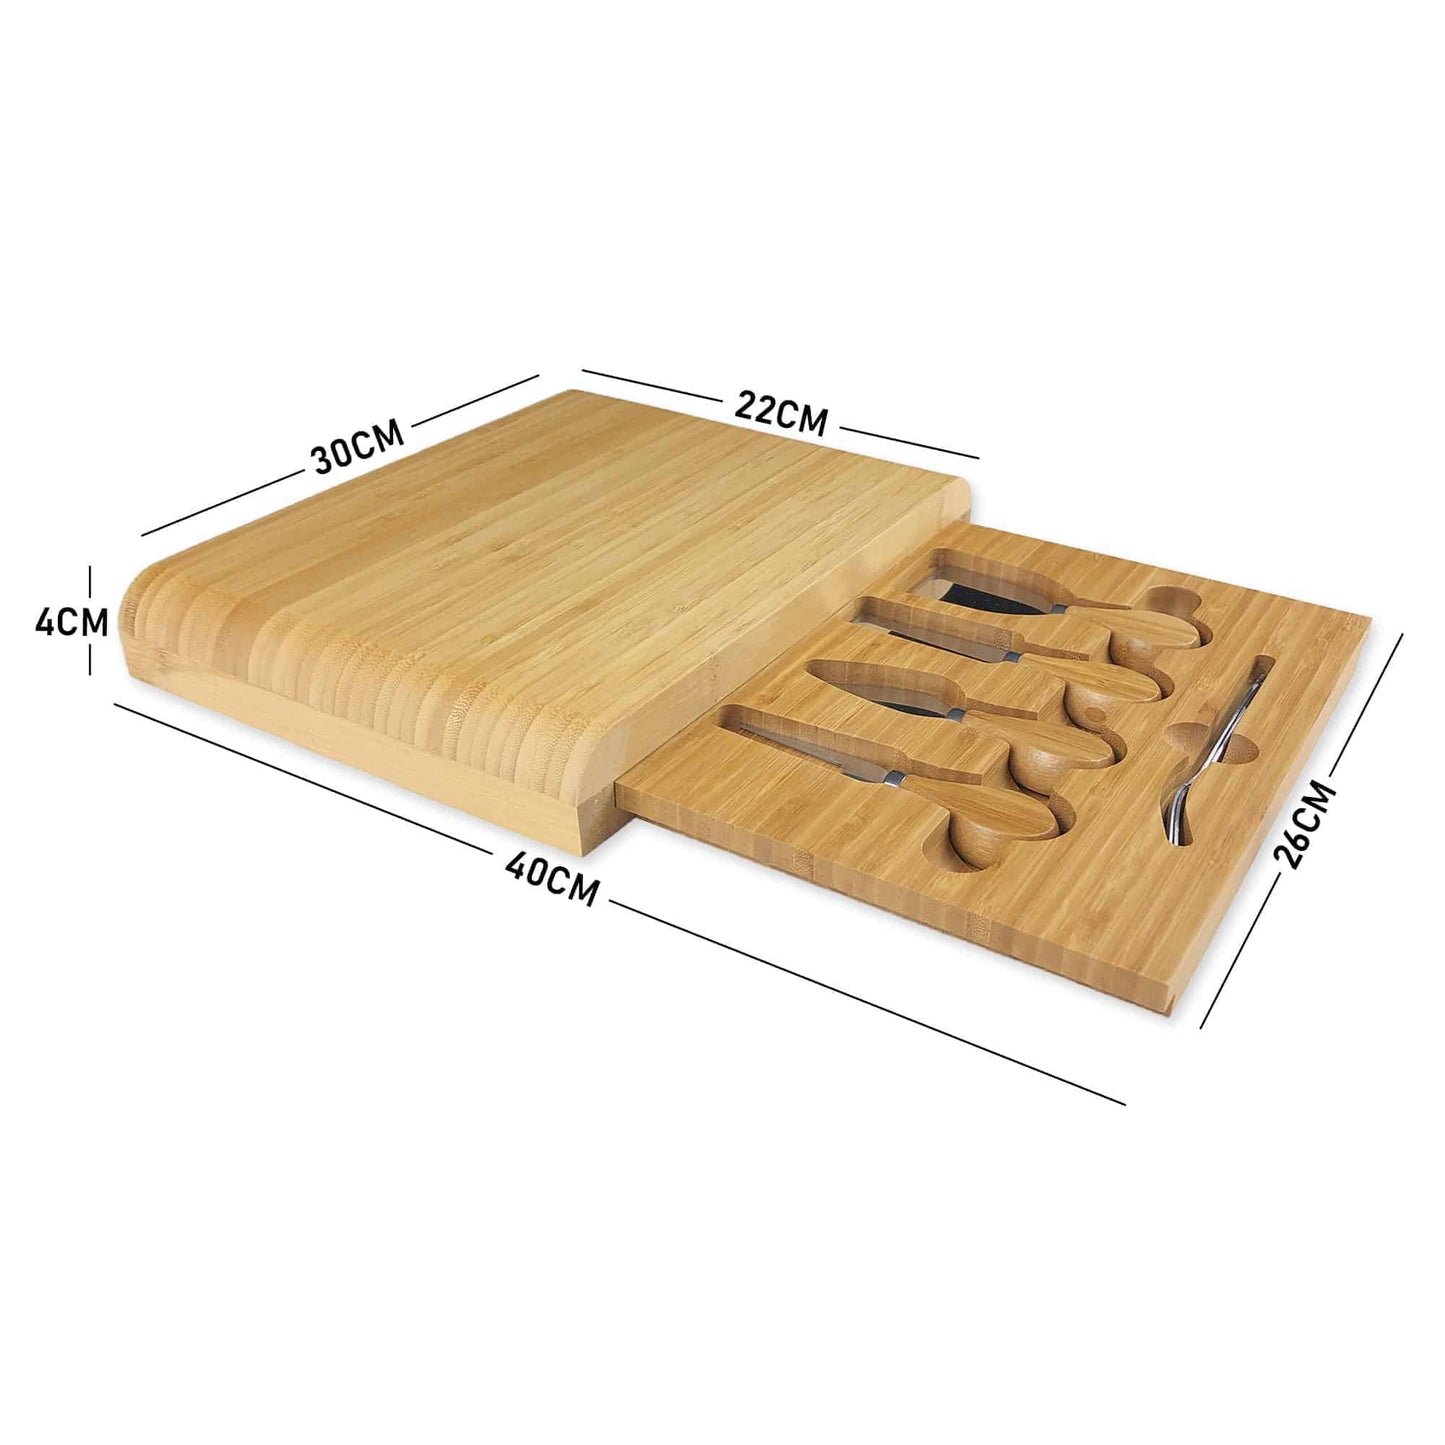 Worlds Greatest Dad Wooden Cheese Board & Knives Gift Set Fathers Day